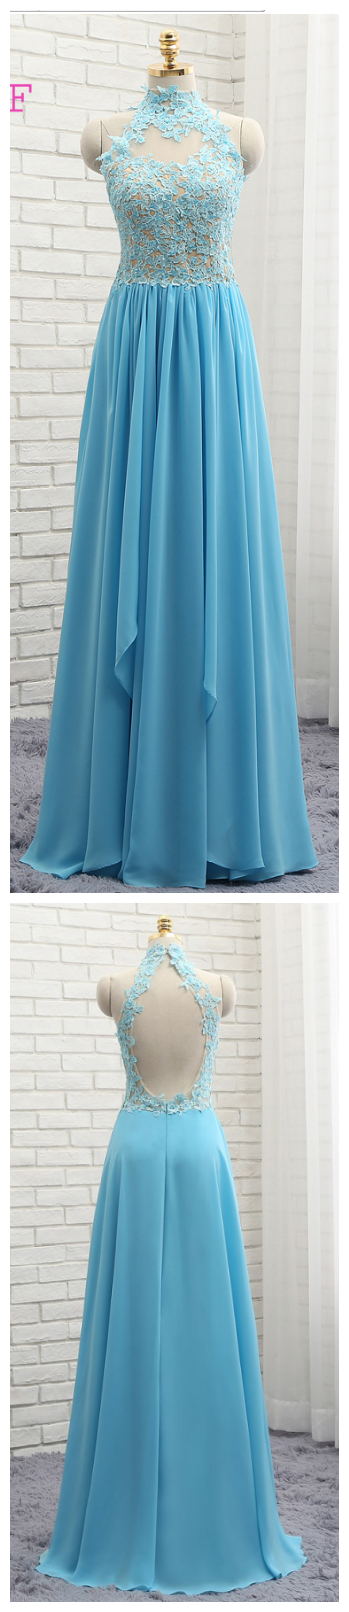 P1137 Prom Dresses, A-line High Collar Sky Blue Chiffon Lace Sexy Long Prom Gown ,evening Dresses, Evening Gown,high Neck Open Back Long Chiffon